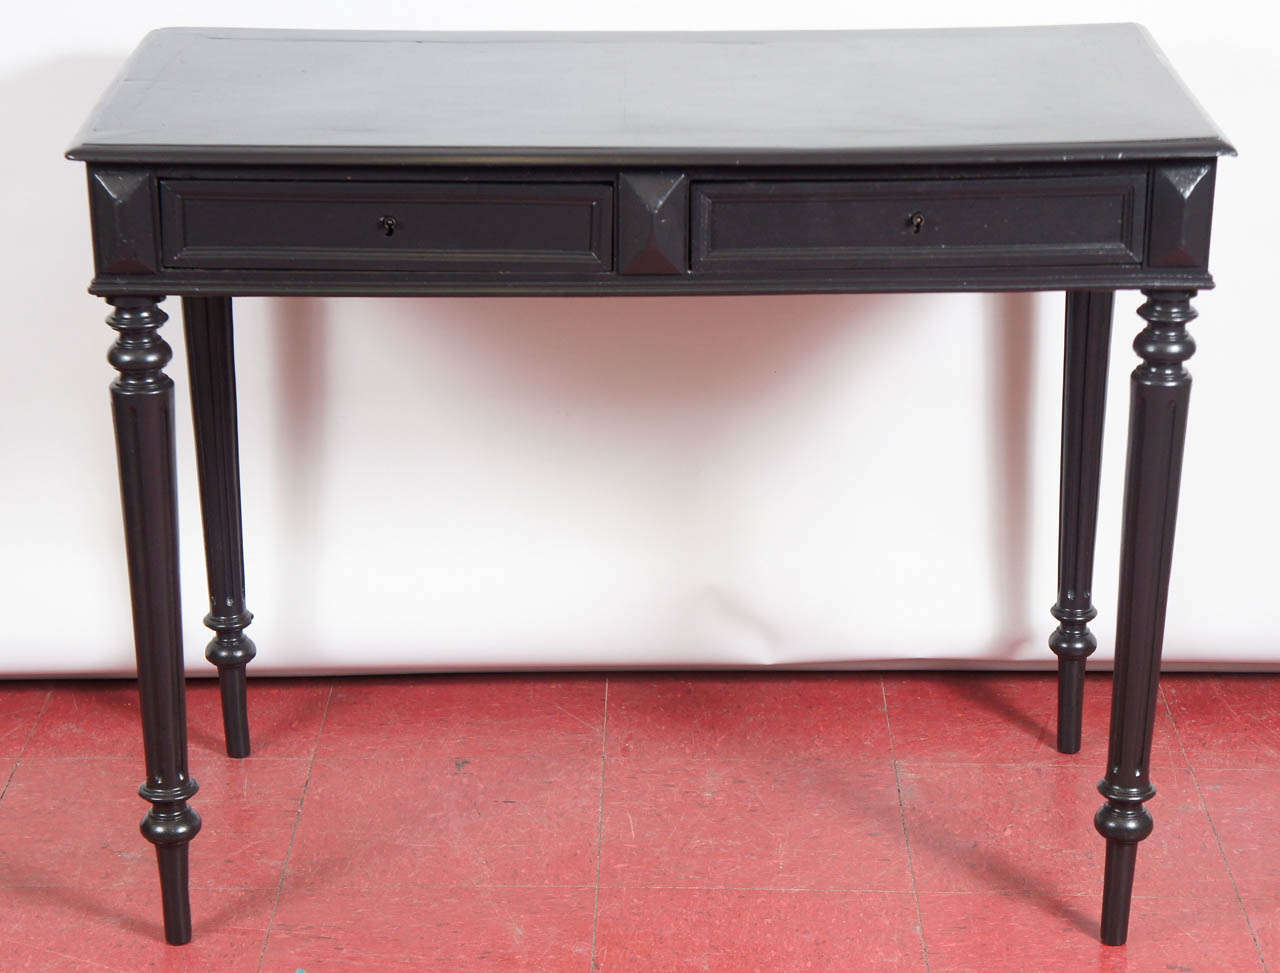 A handsom Napoleon III desk with large drawer.  Perfect as a night table, side table or vanity.